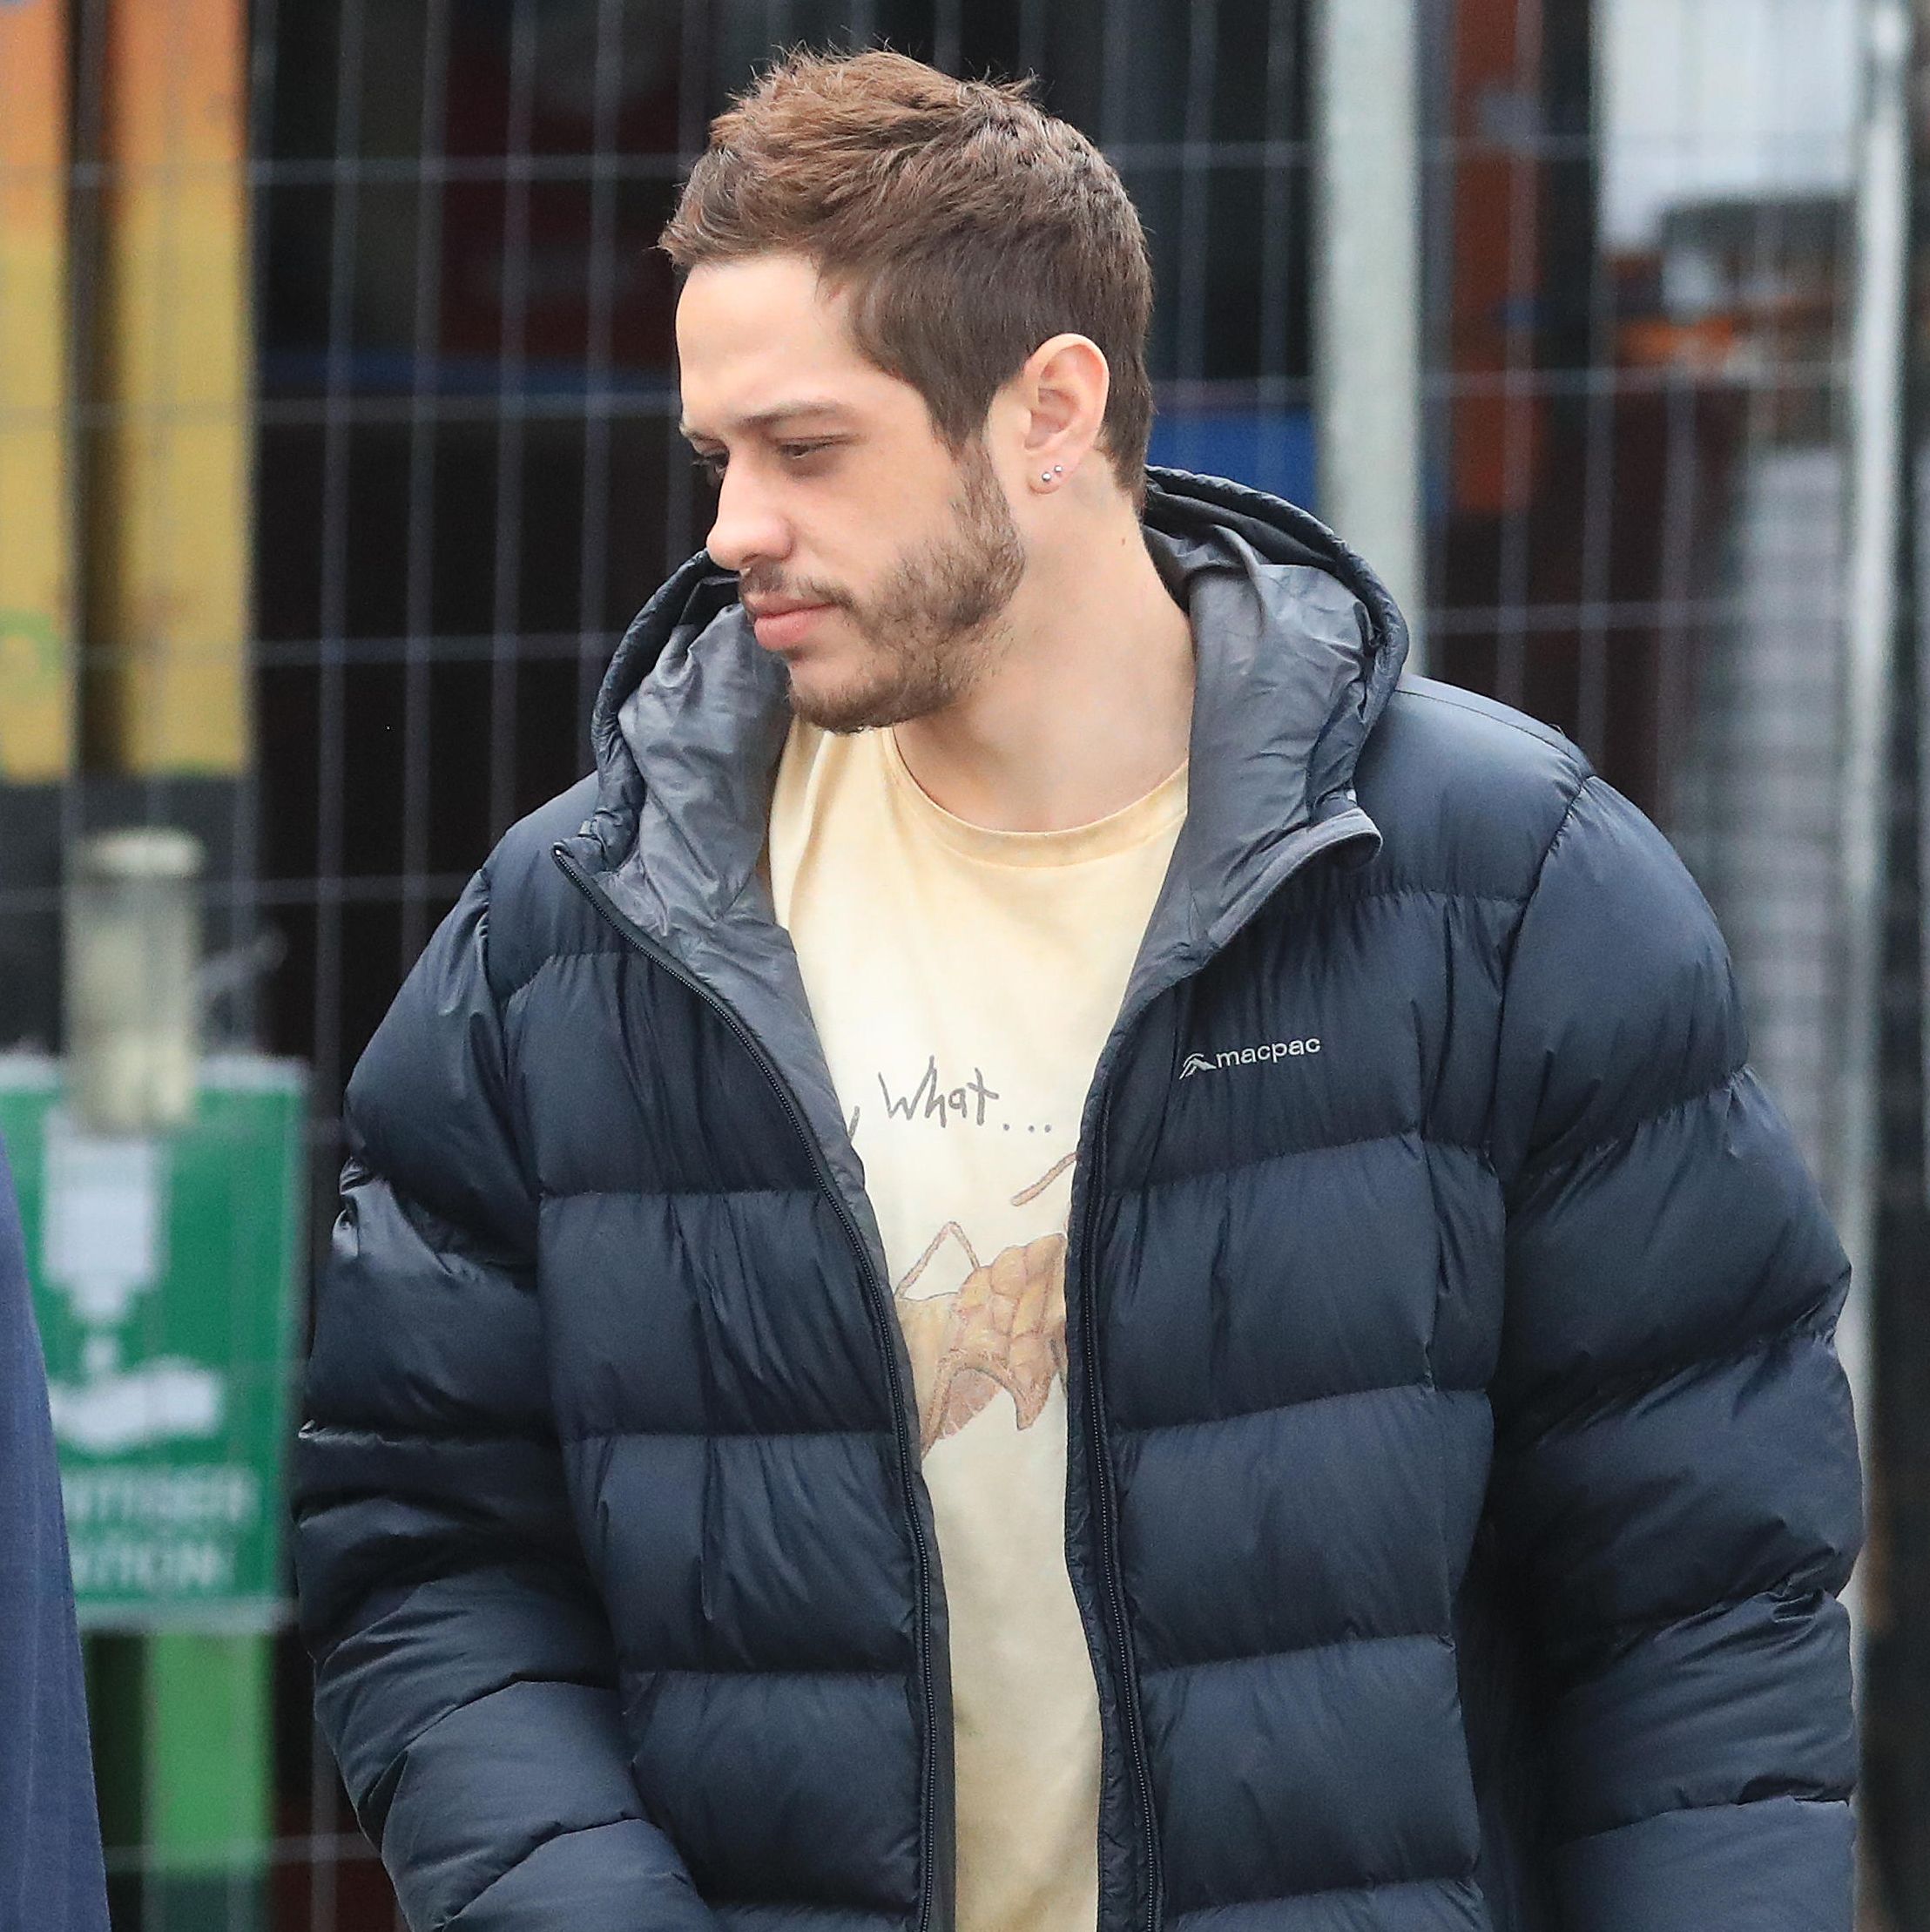 How Pete Davidson Is Doing After His Breakup With Kim Kardashian